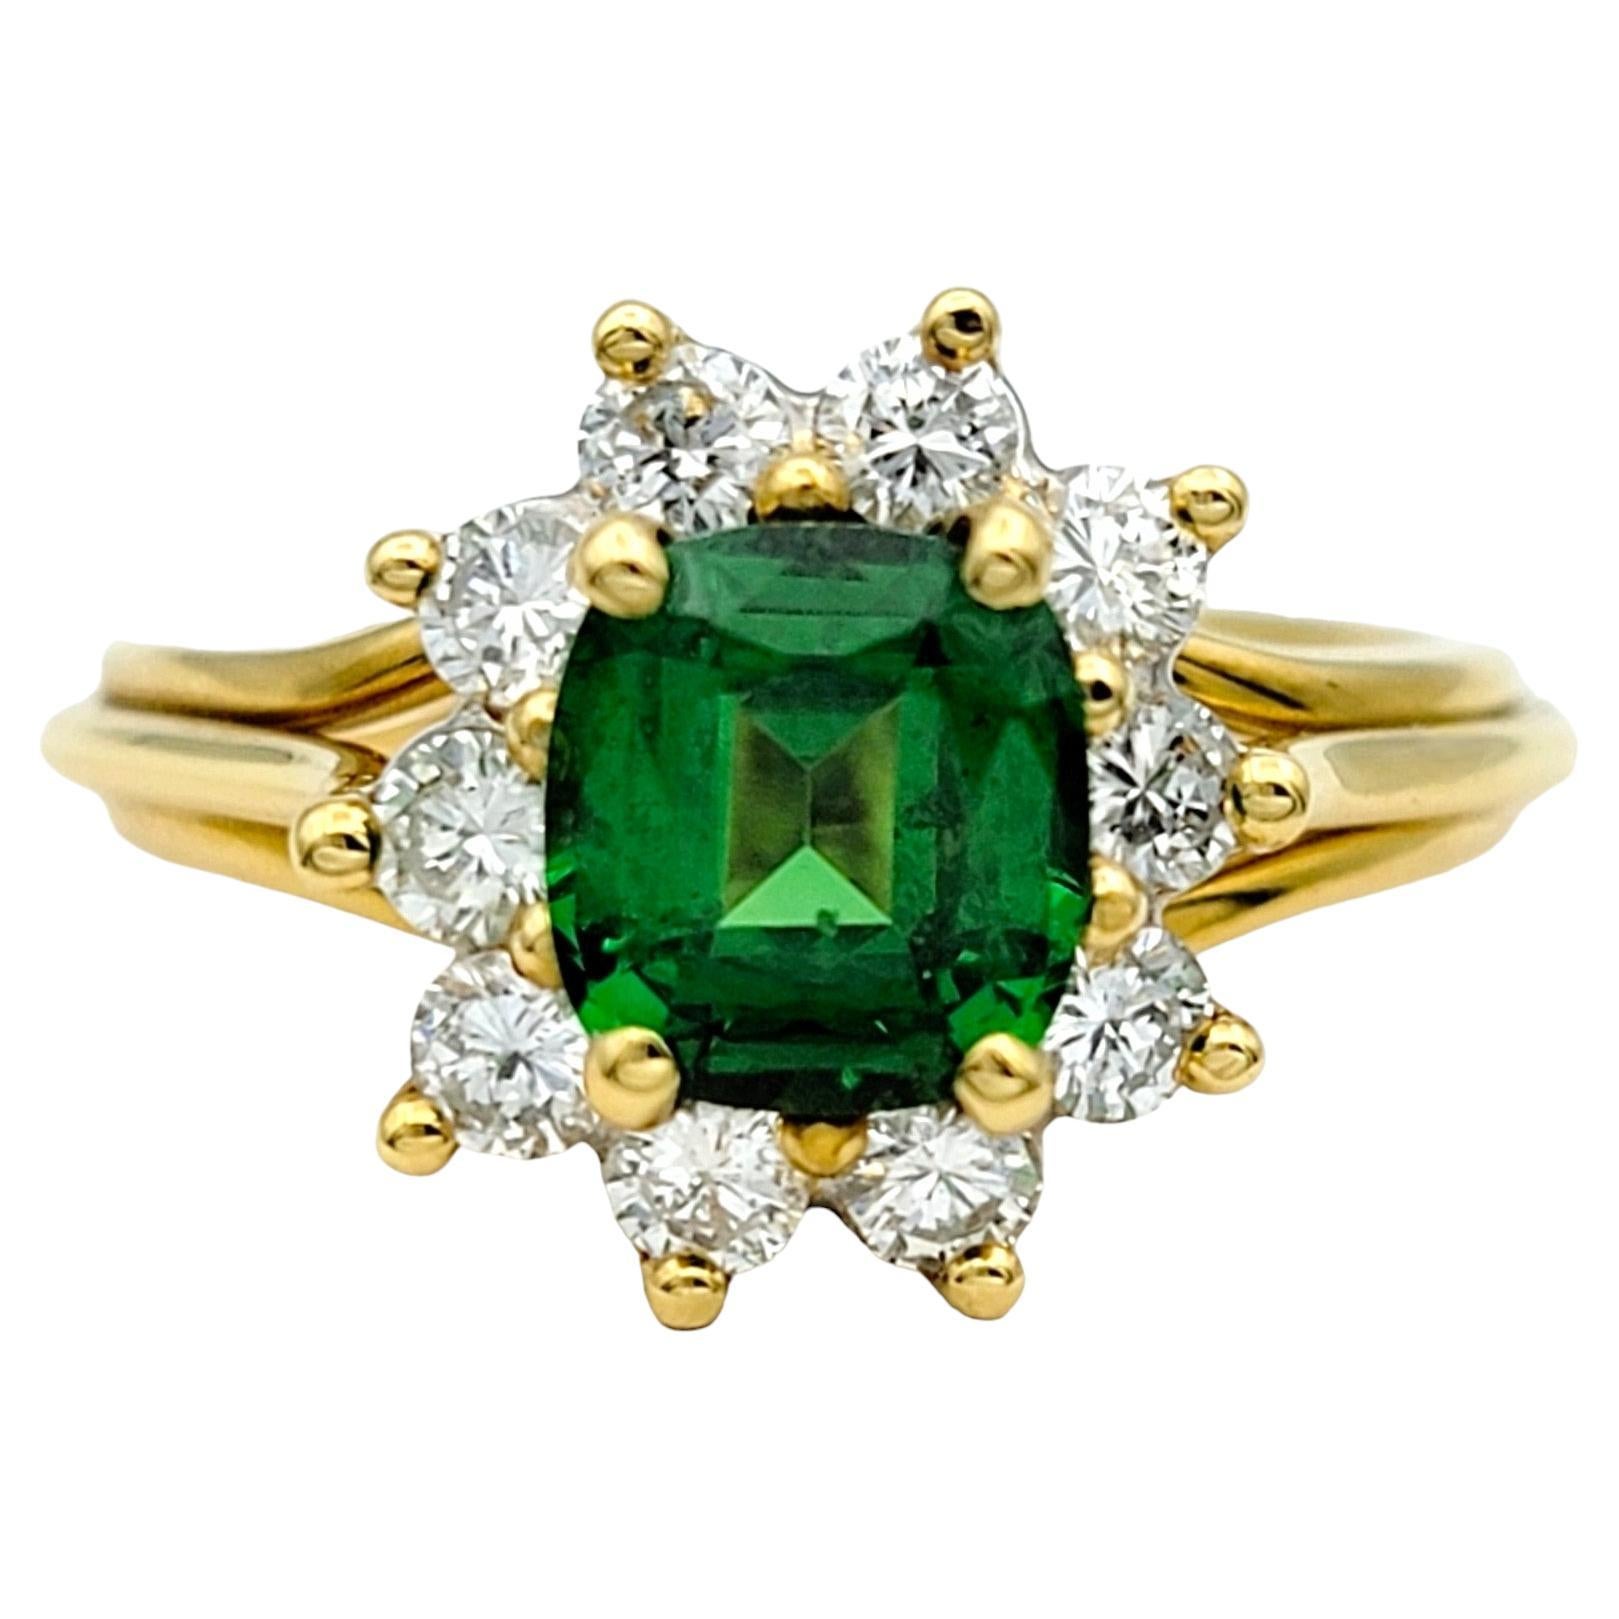 Ring Size: 6

This stunning ring showcases a vibrant green cushion-cut tsavorite gemstone, encircled by a glittering halo of diamonds, all set in warm and luxurious 18 karat yellow gold. The vivid green hue of the tsavorite is beautifully